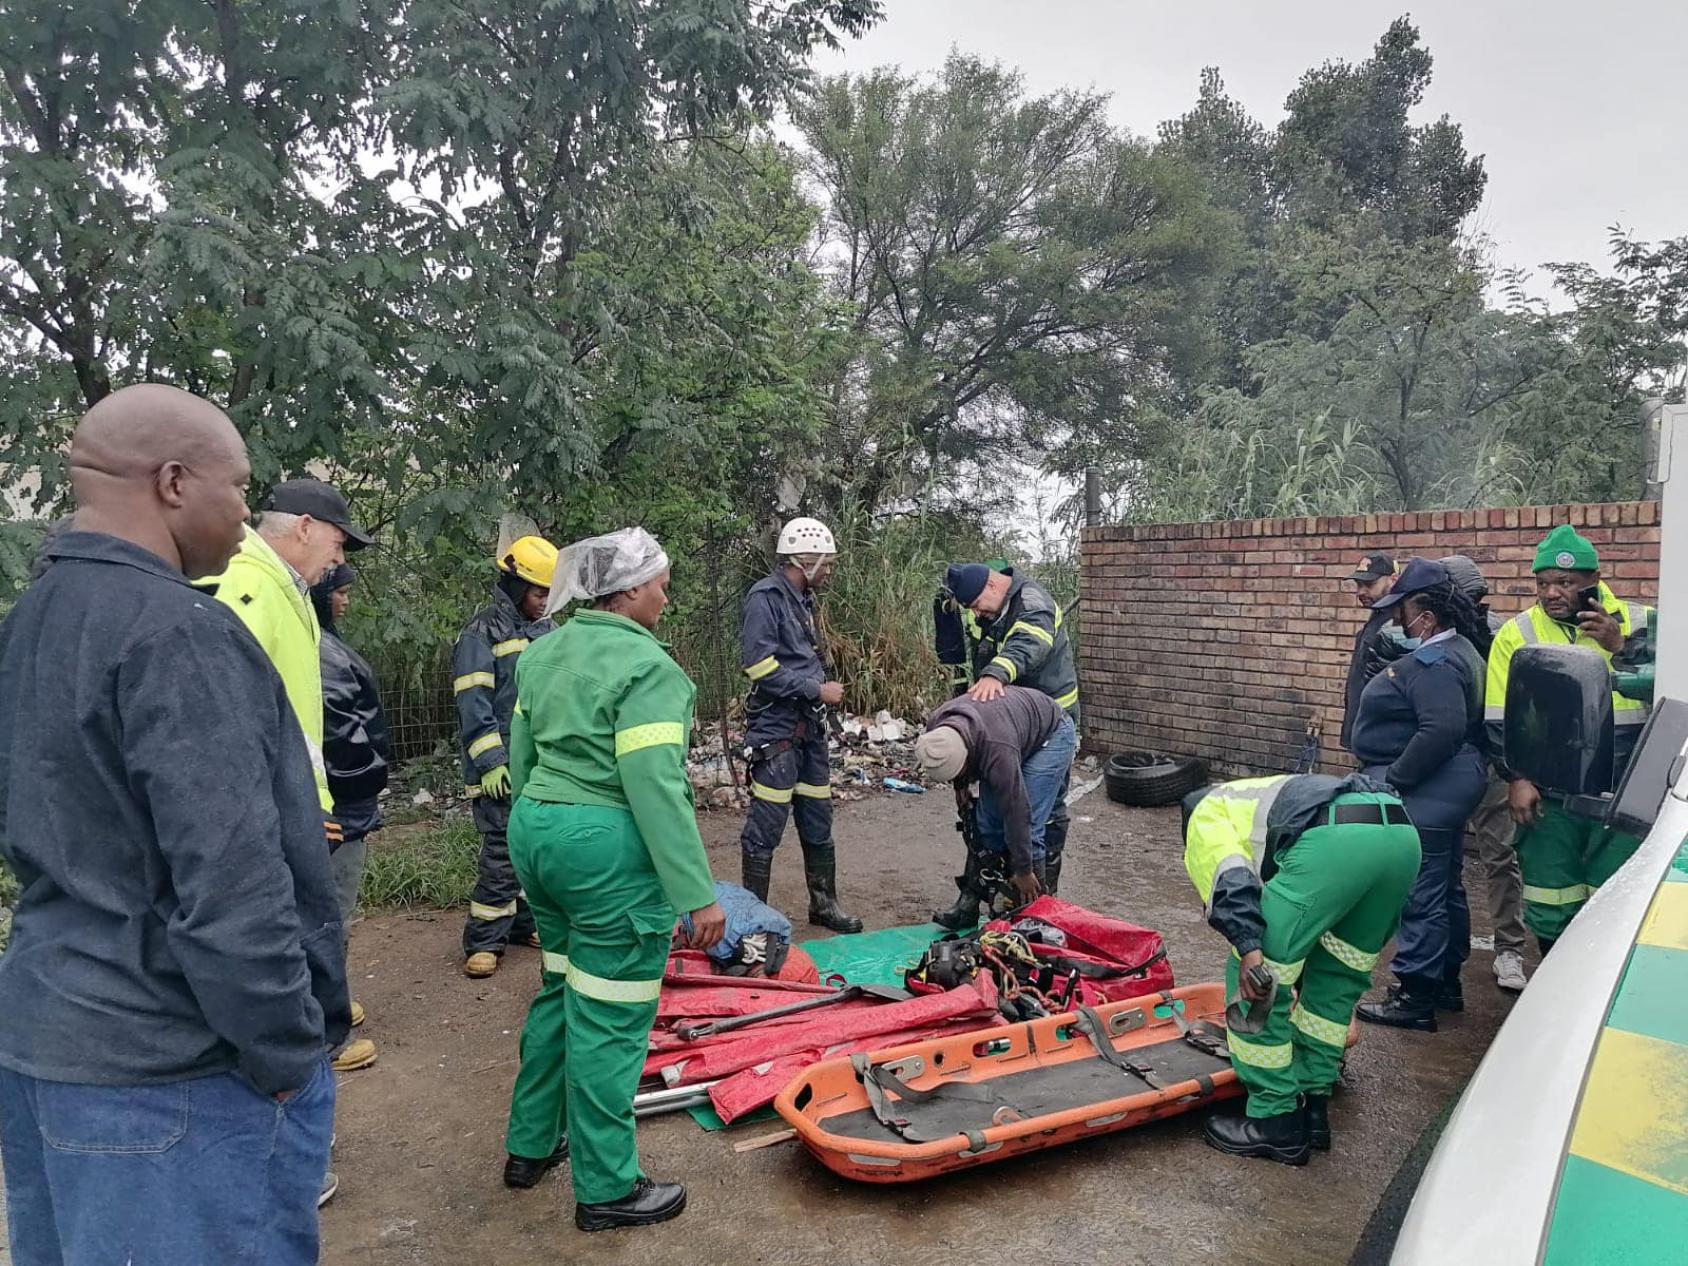 Rescue workers in green outfits 